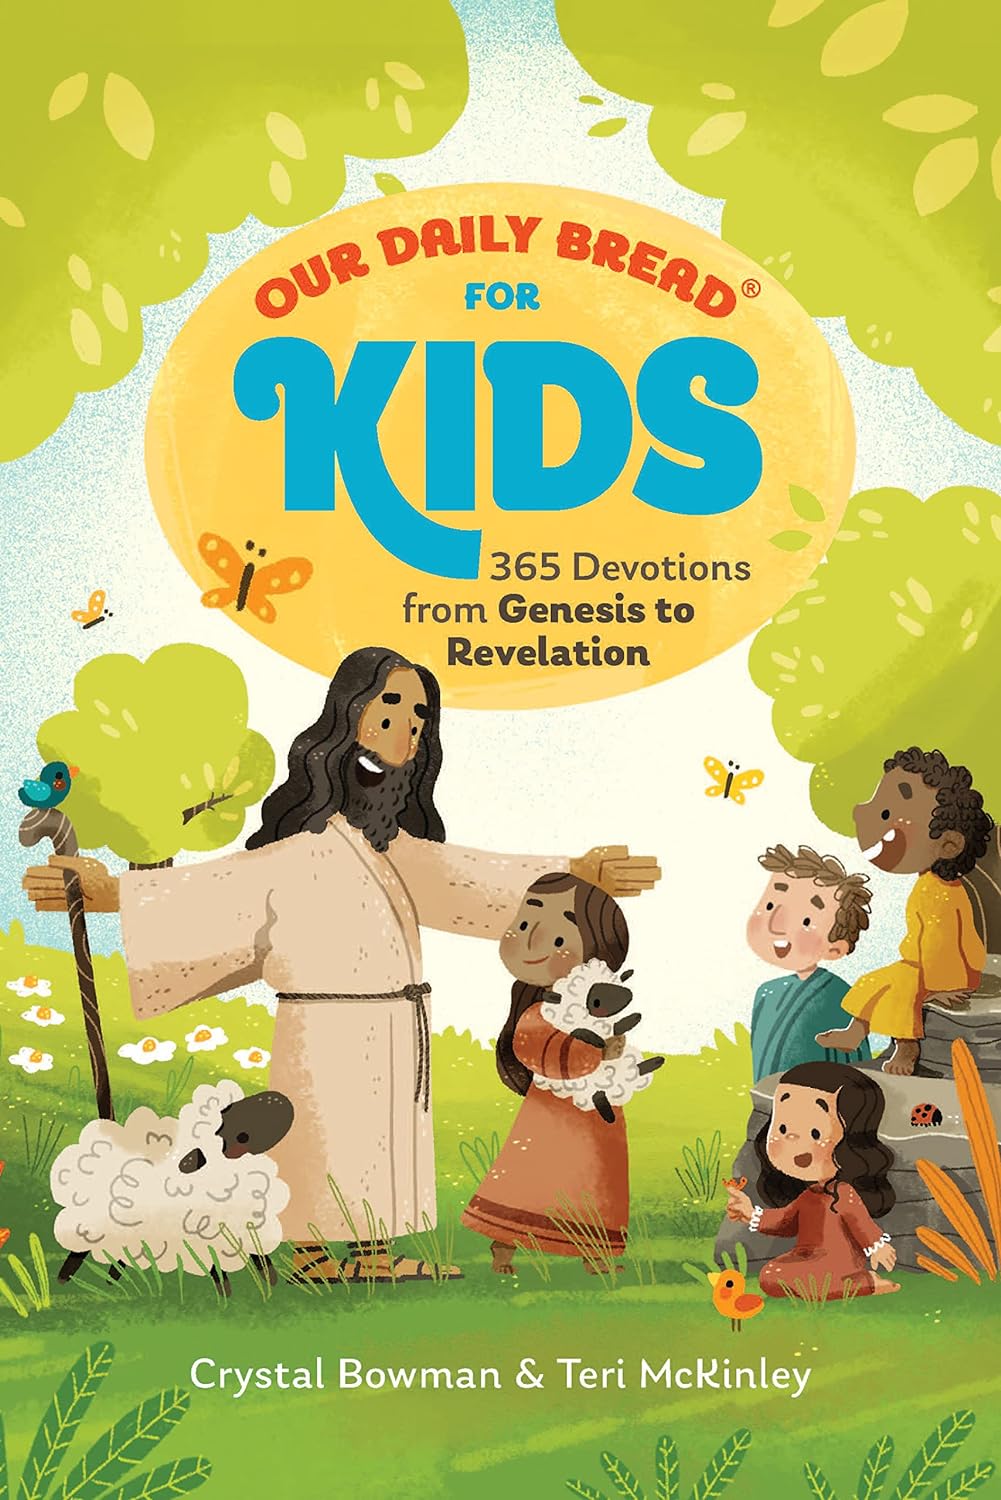 Our Daily Bread for Kids 365 Devotions from Genesis to Revelation